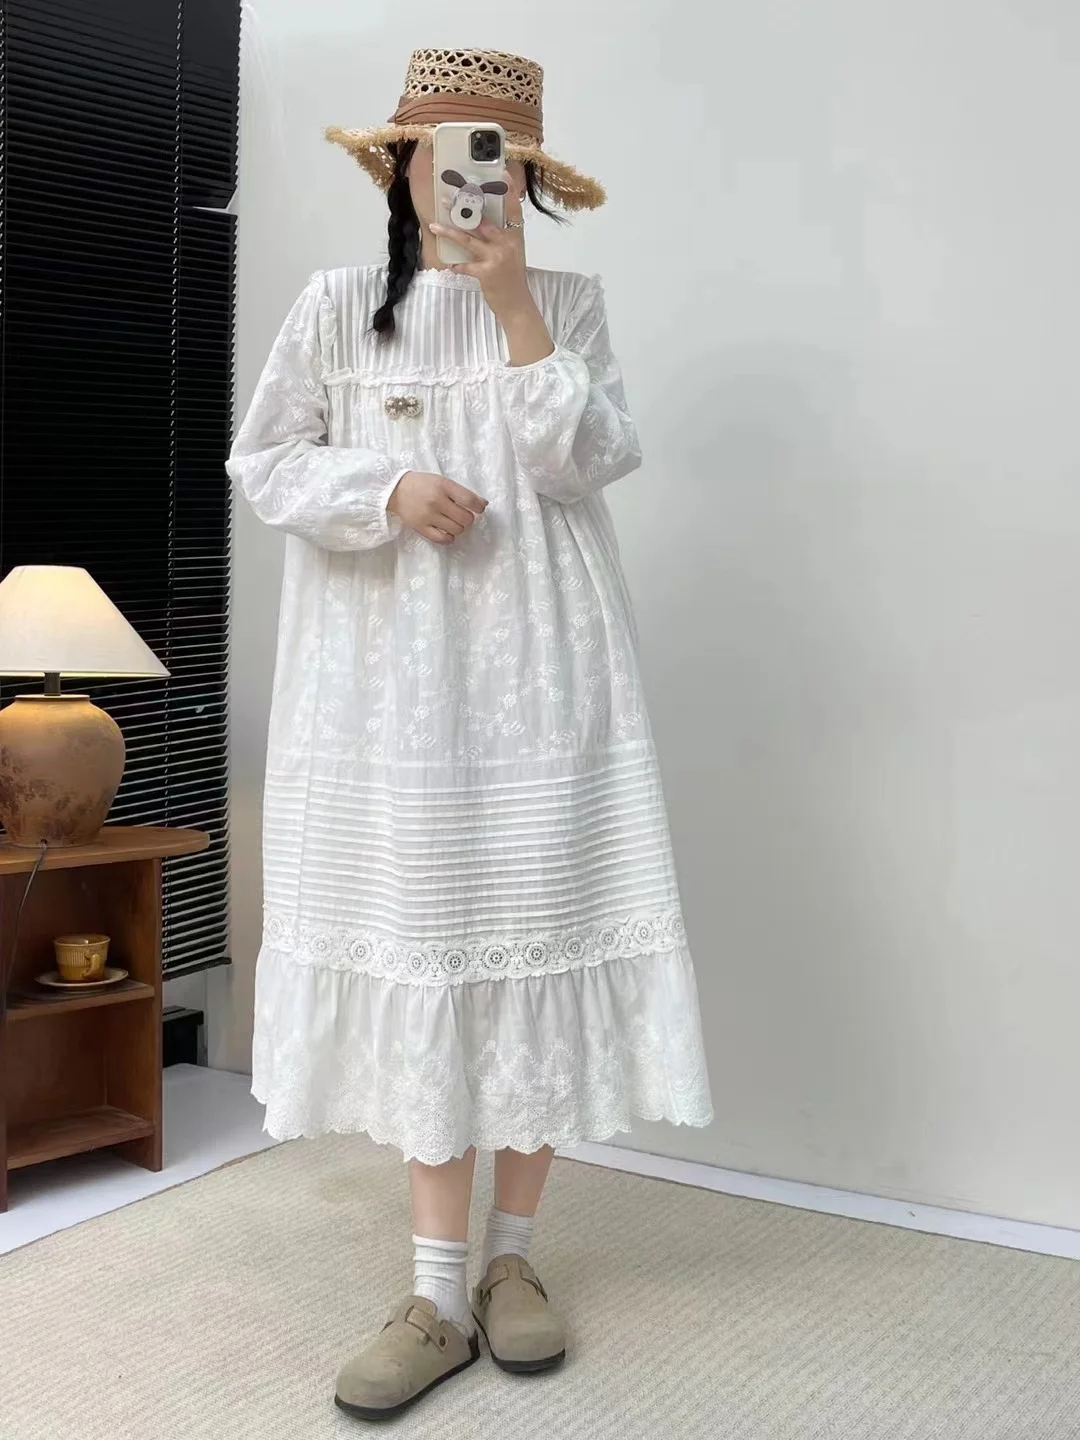 

Bust 130cm Mori kei clothing vintage cotton long dress for women summer spring Japan style long sleeve embroider white dress